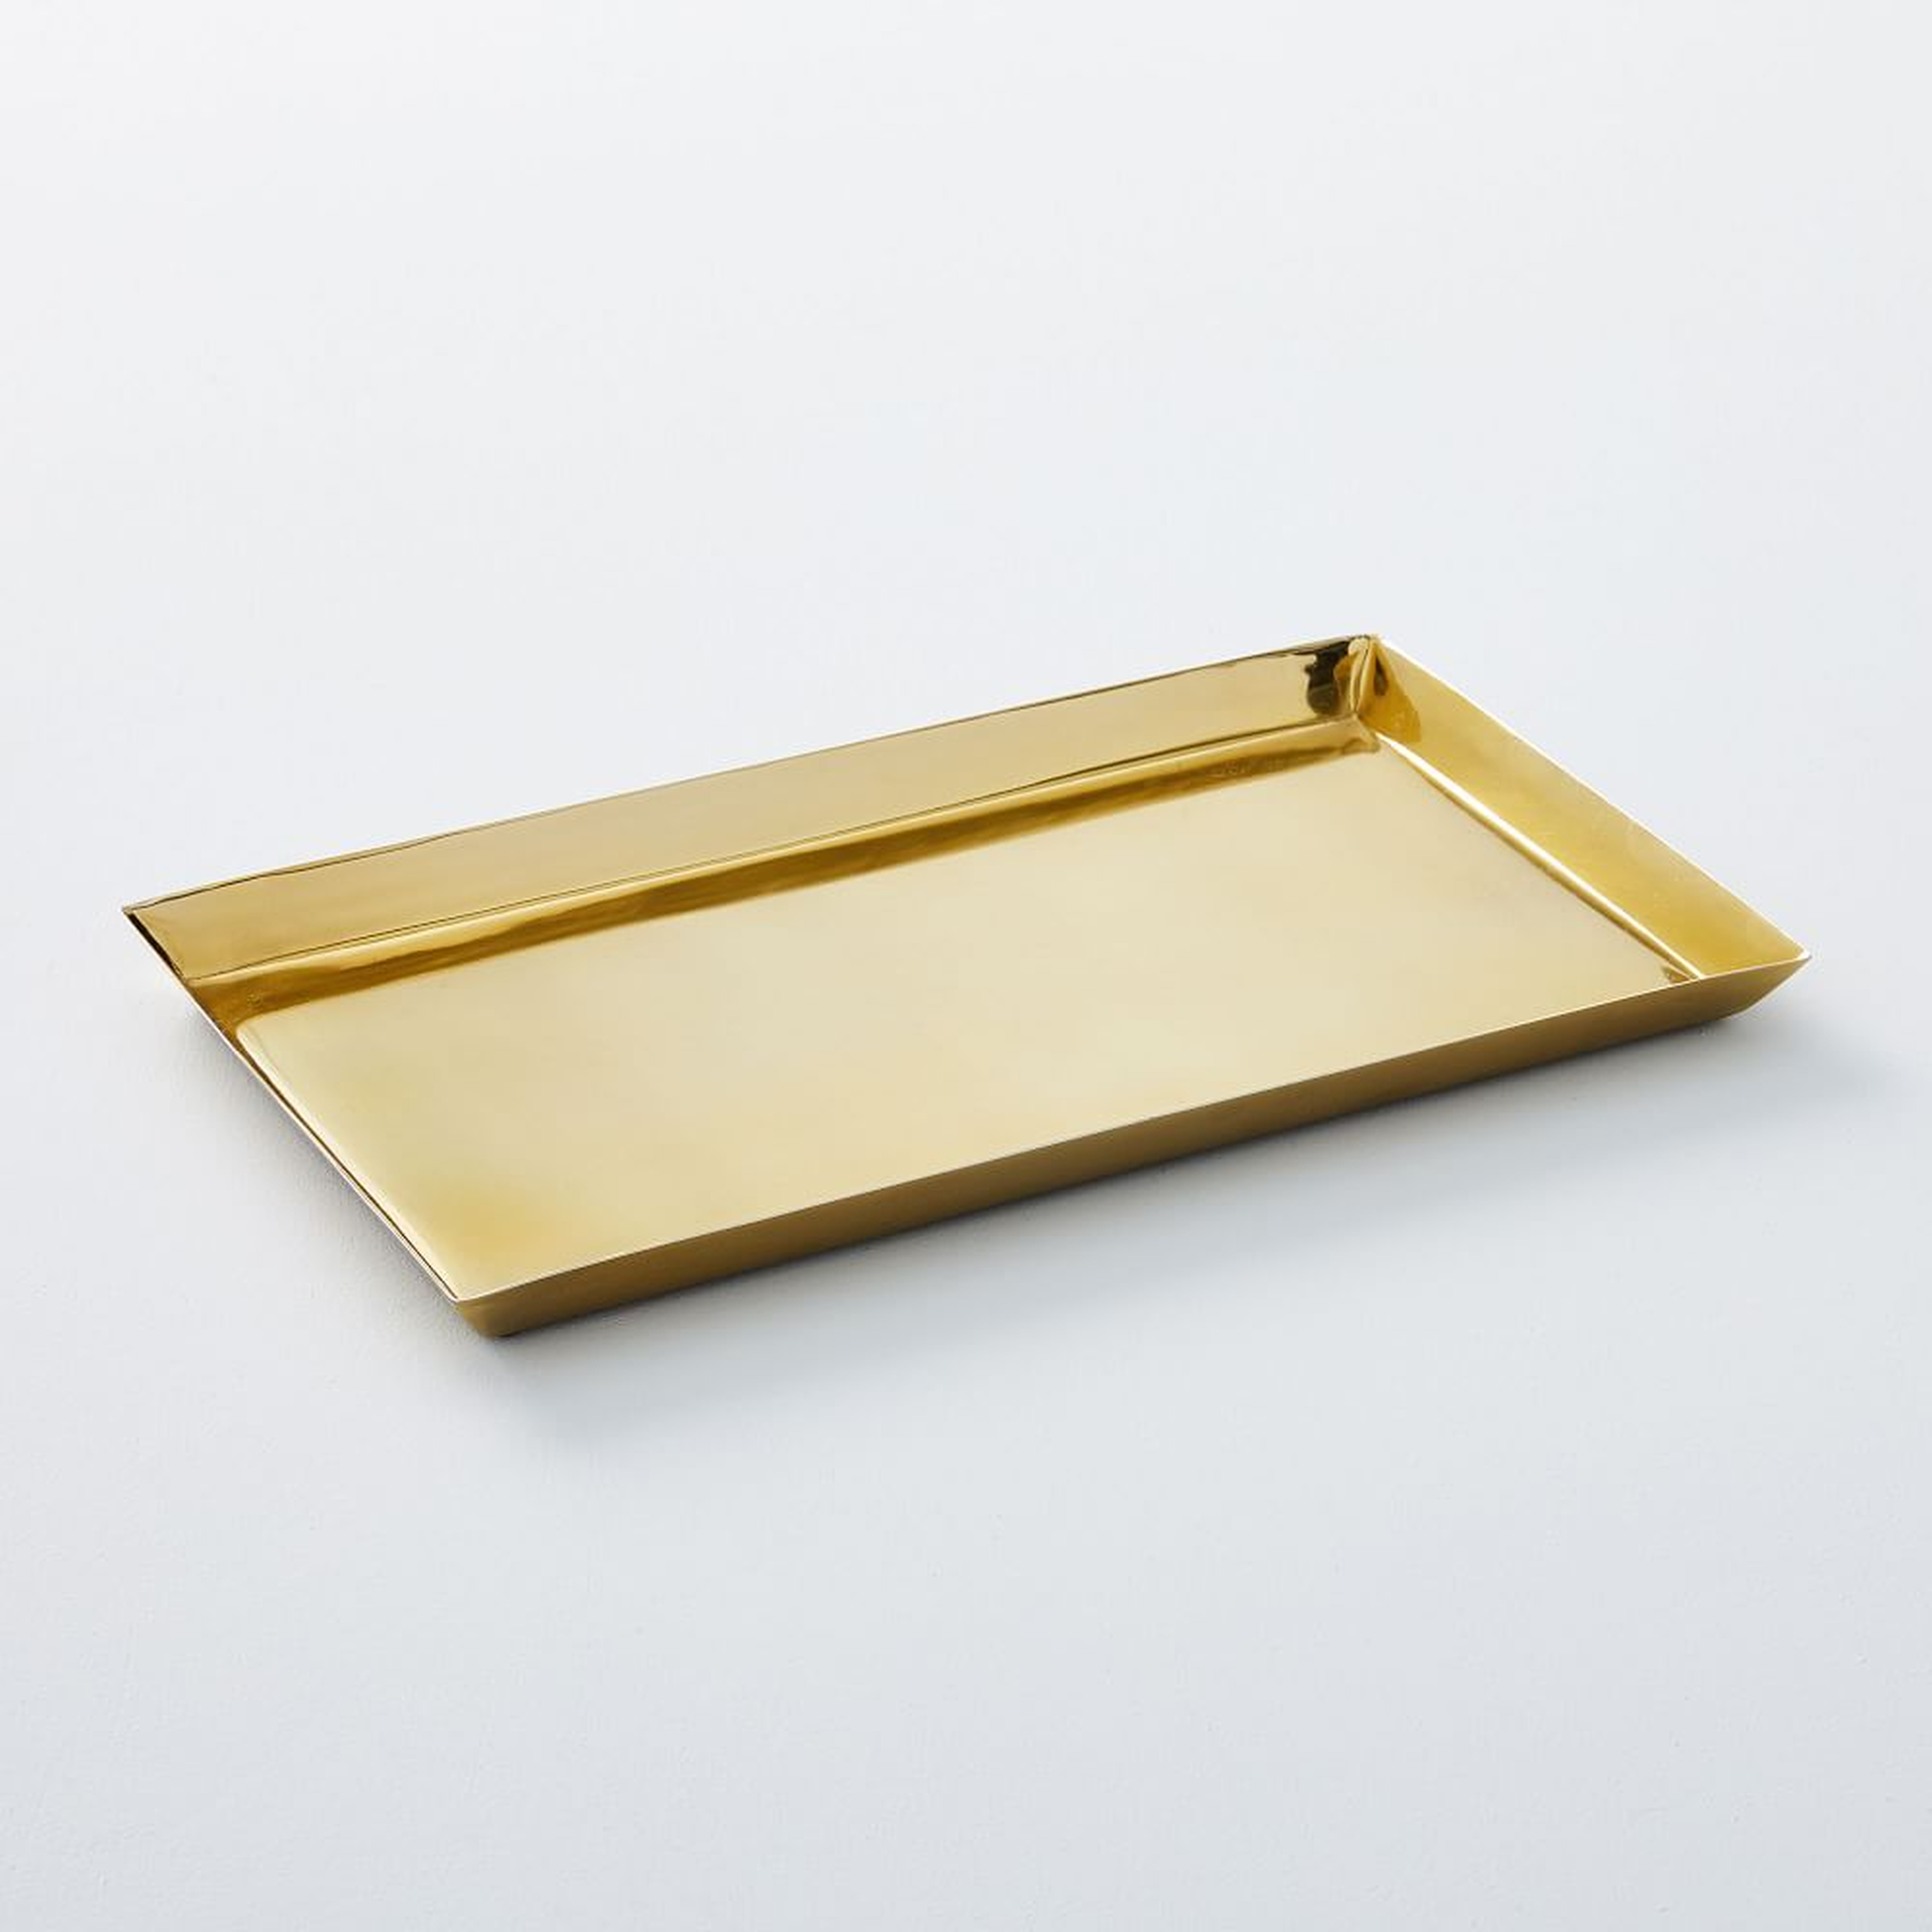 Foundations Brass Tray, Large - West Elm